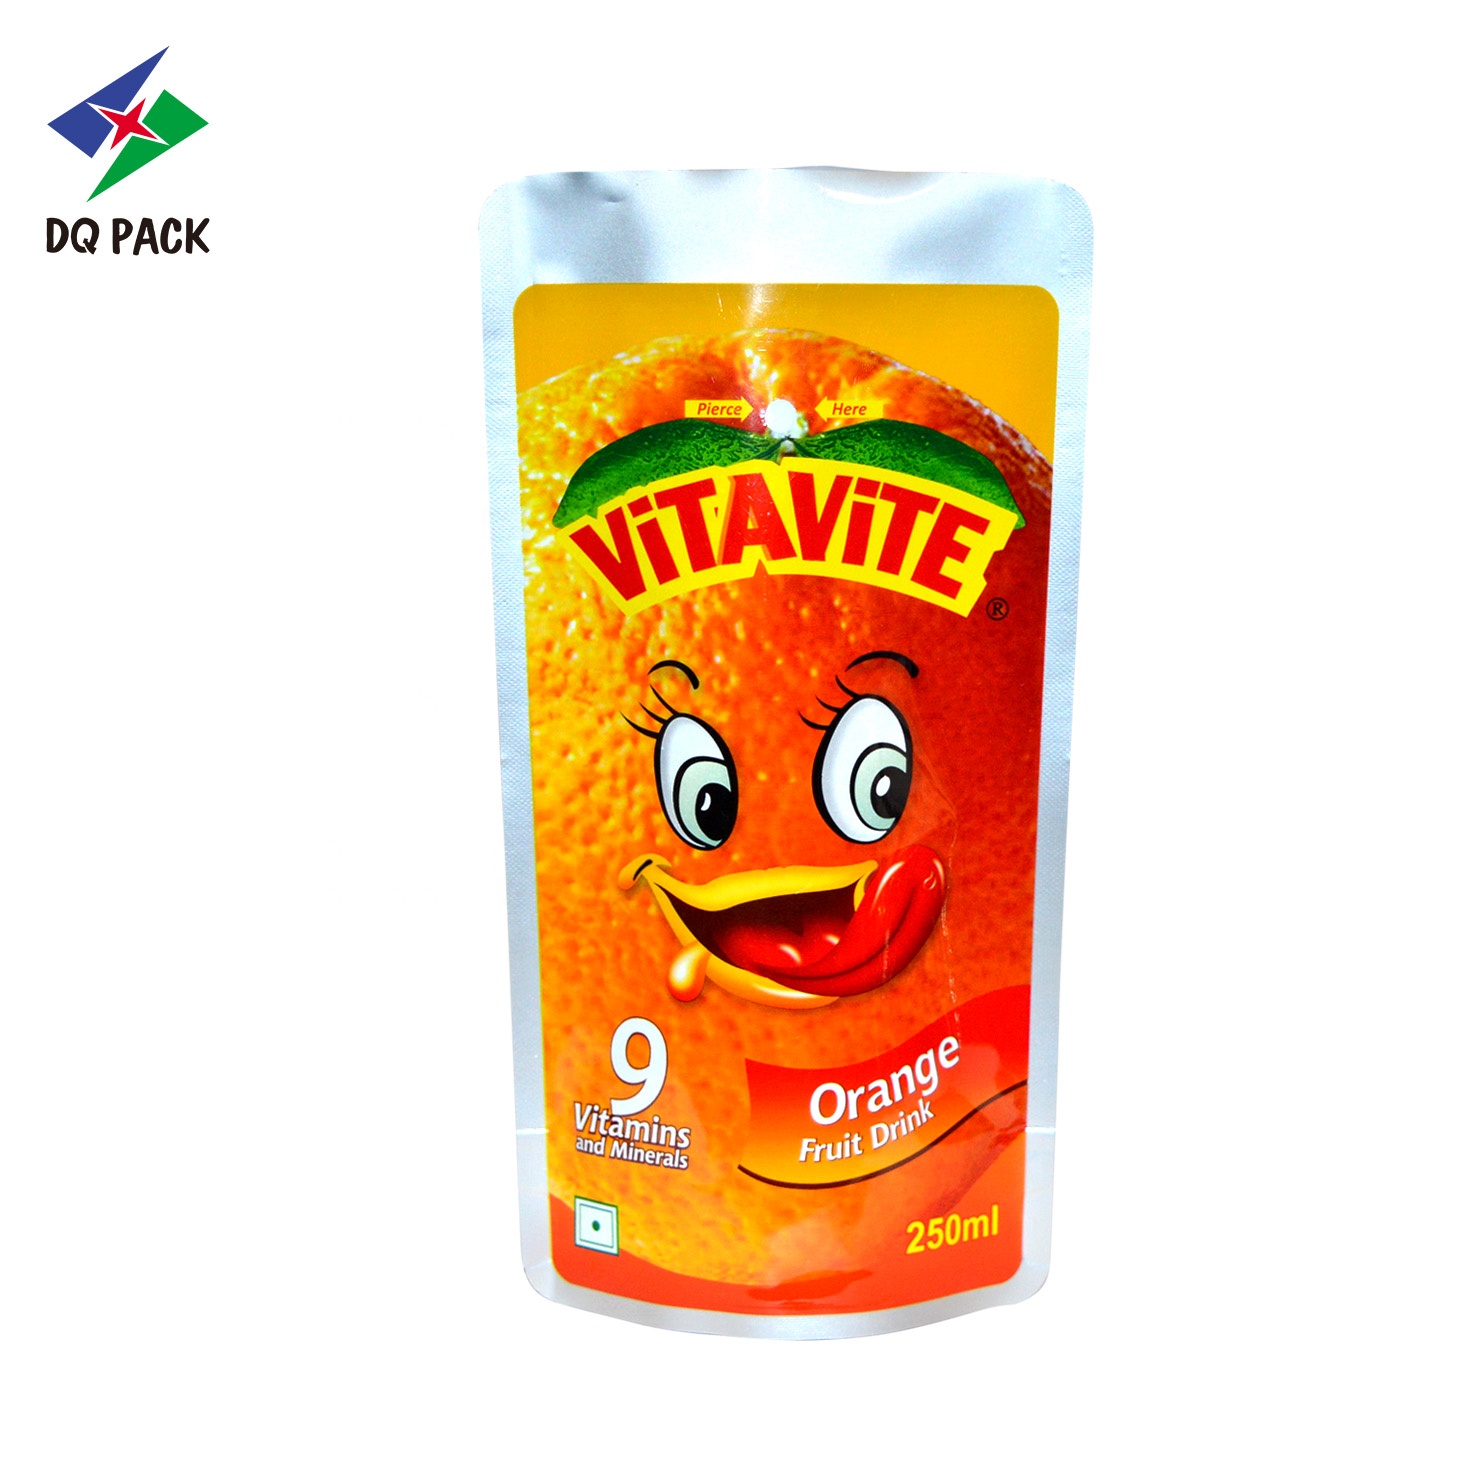 DQ PACK Customized China Supplier Juice Fruit Packing Plastic Packaging Bag PET/AL/NY Perforated bags